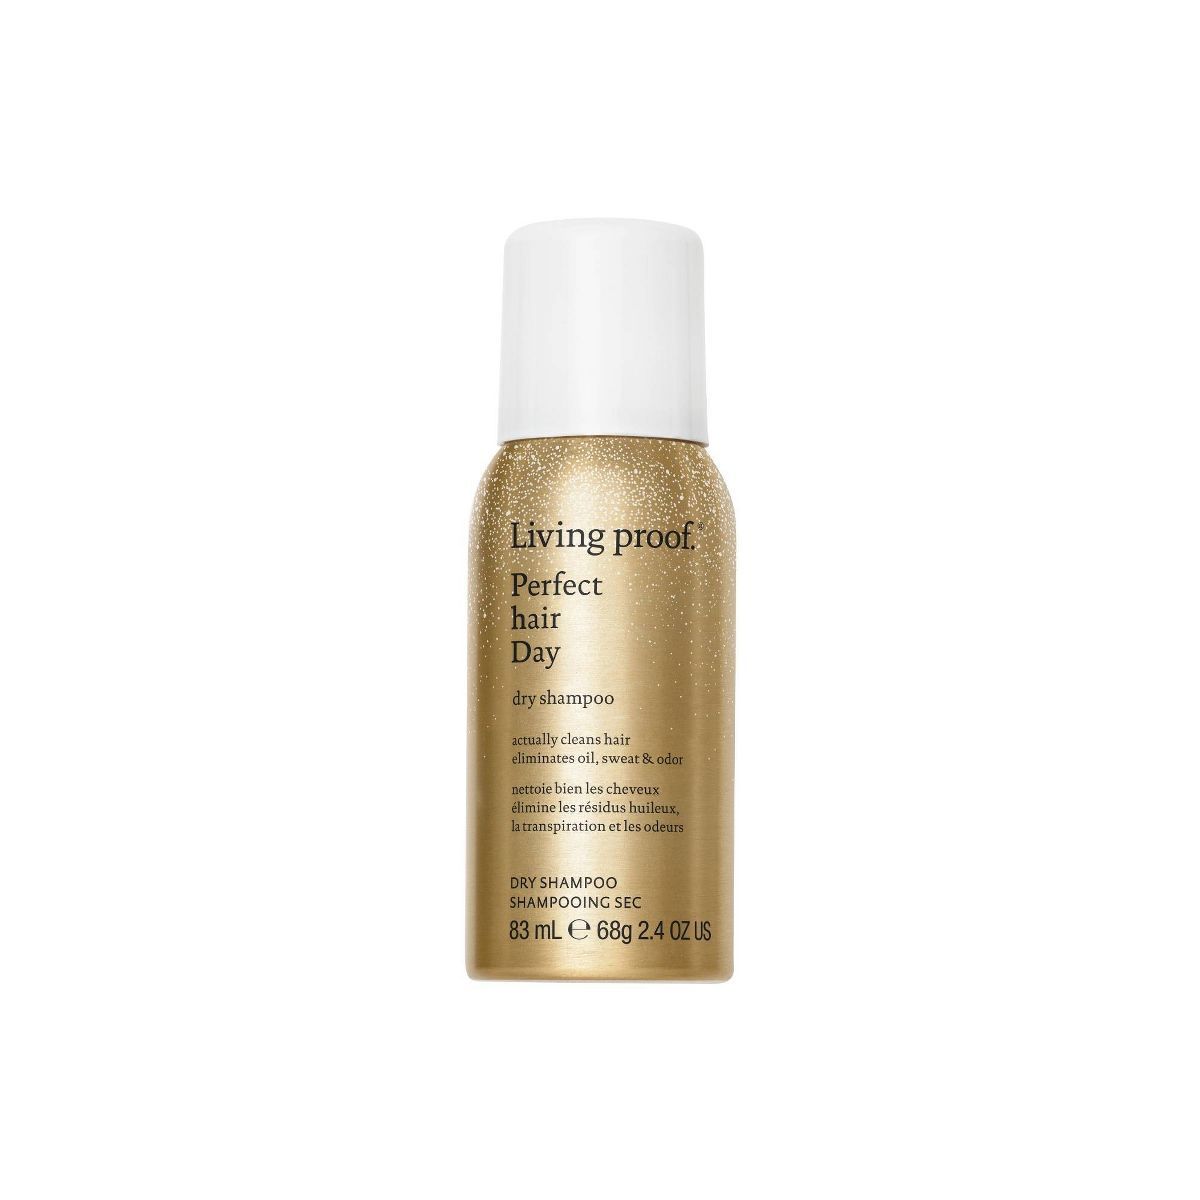 Living Proof PhD Dry Shampoo Painted Gold Can - 2.4oz - Ulta Beauty | Target